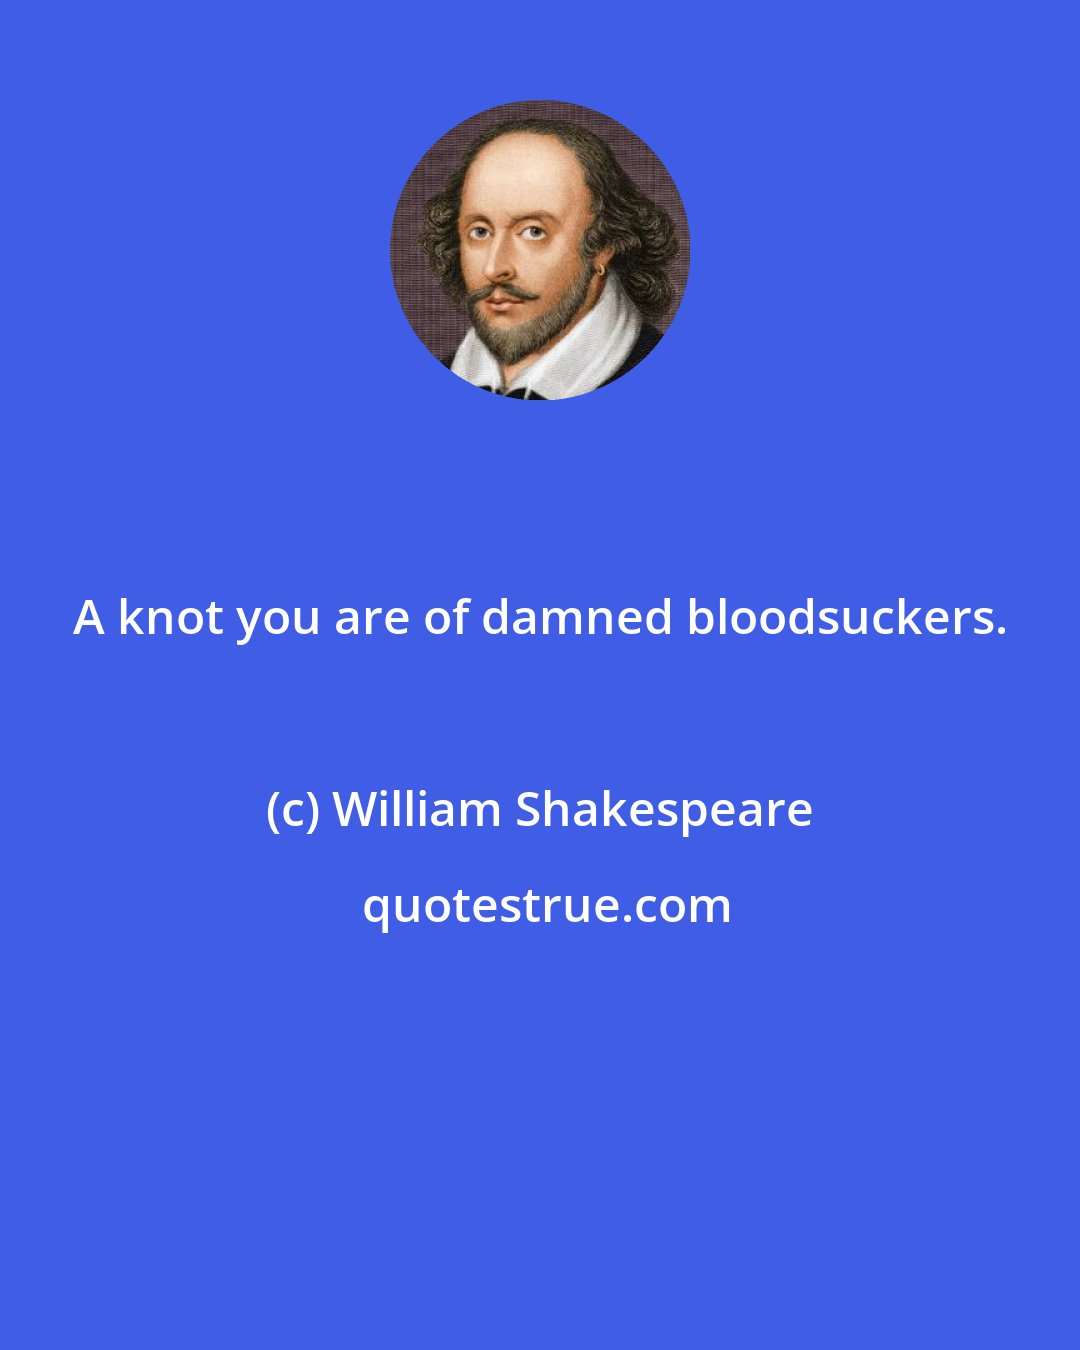 William Shakespeare: A knot you are of damned bloodsuckers.